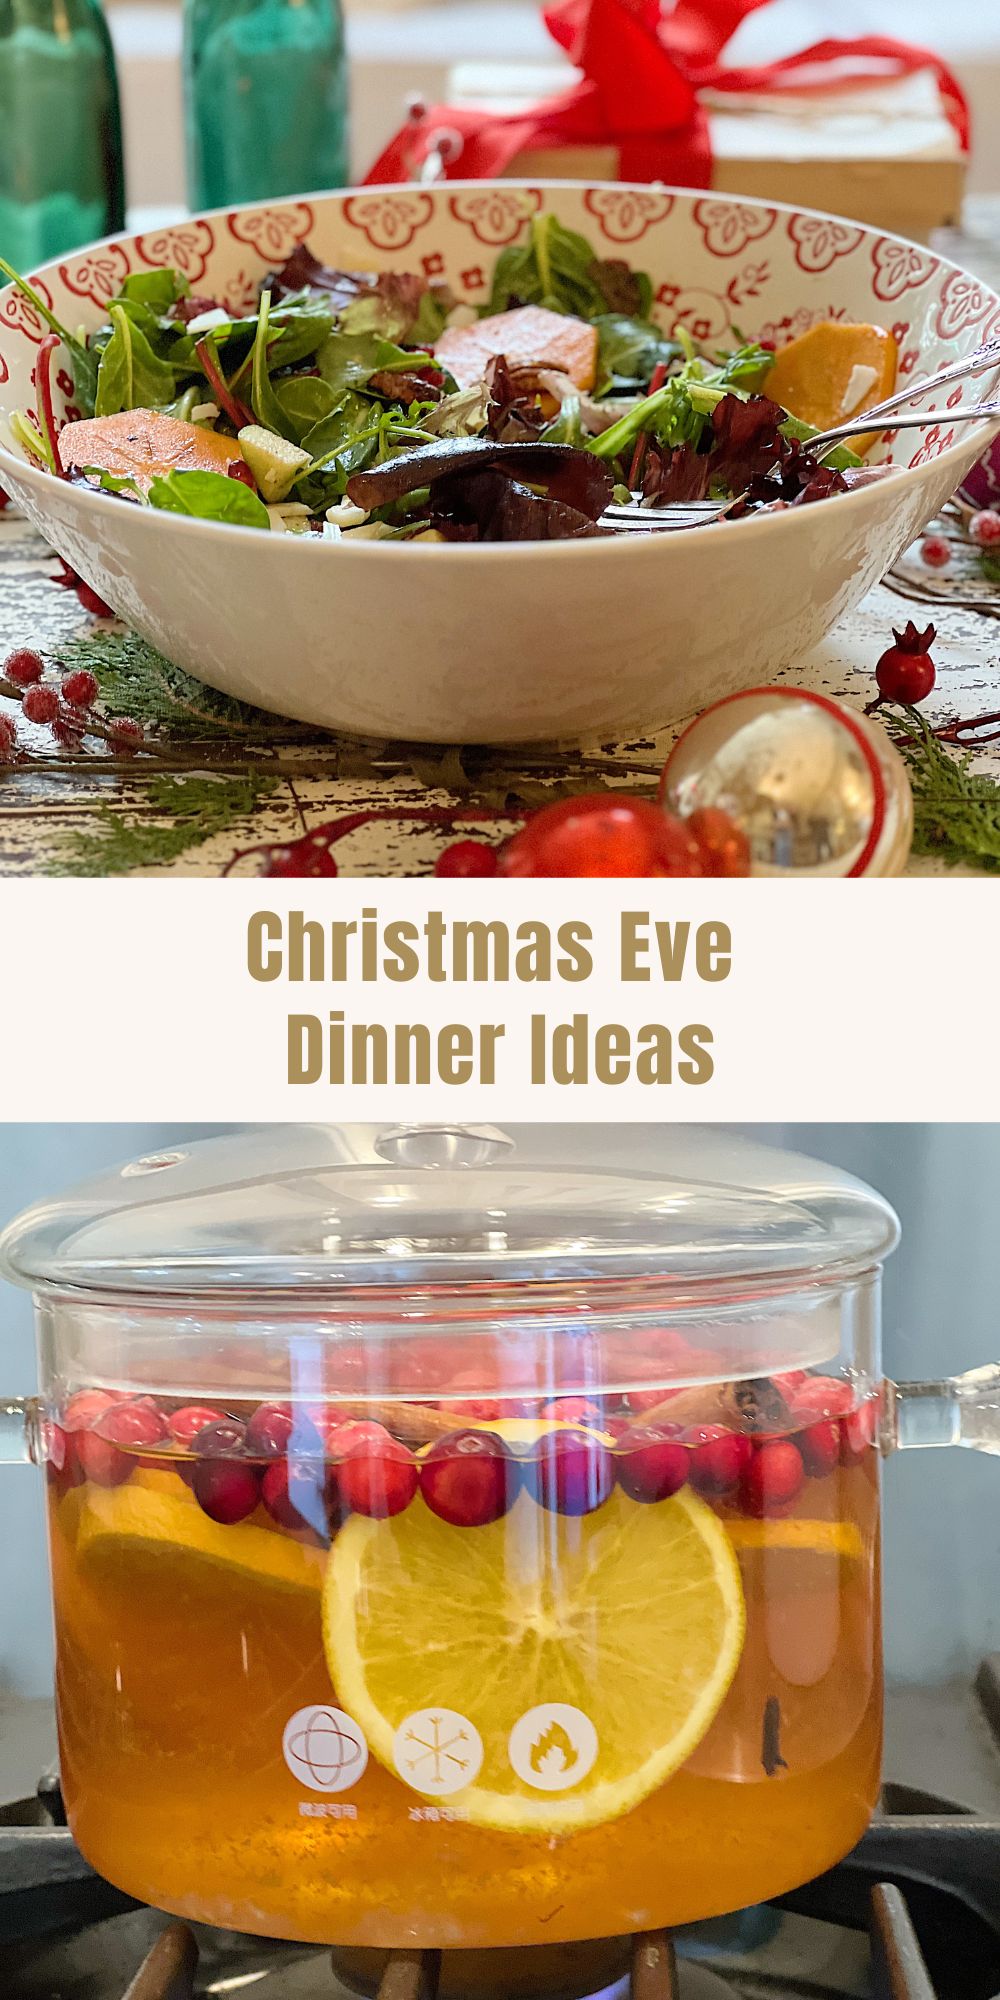 As you plan your Christmas menus, I wanted to share three new recipes for Christmas Eve dinner ideas. These are easy to make and delicious!